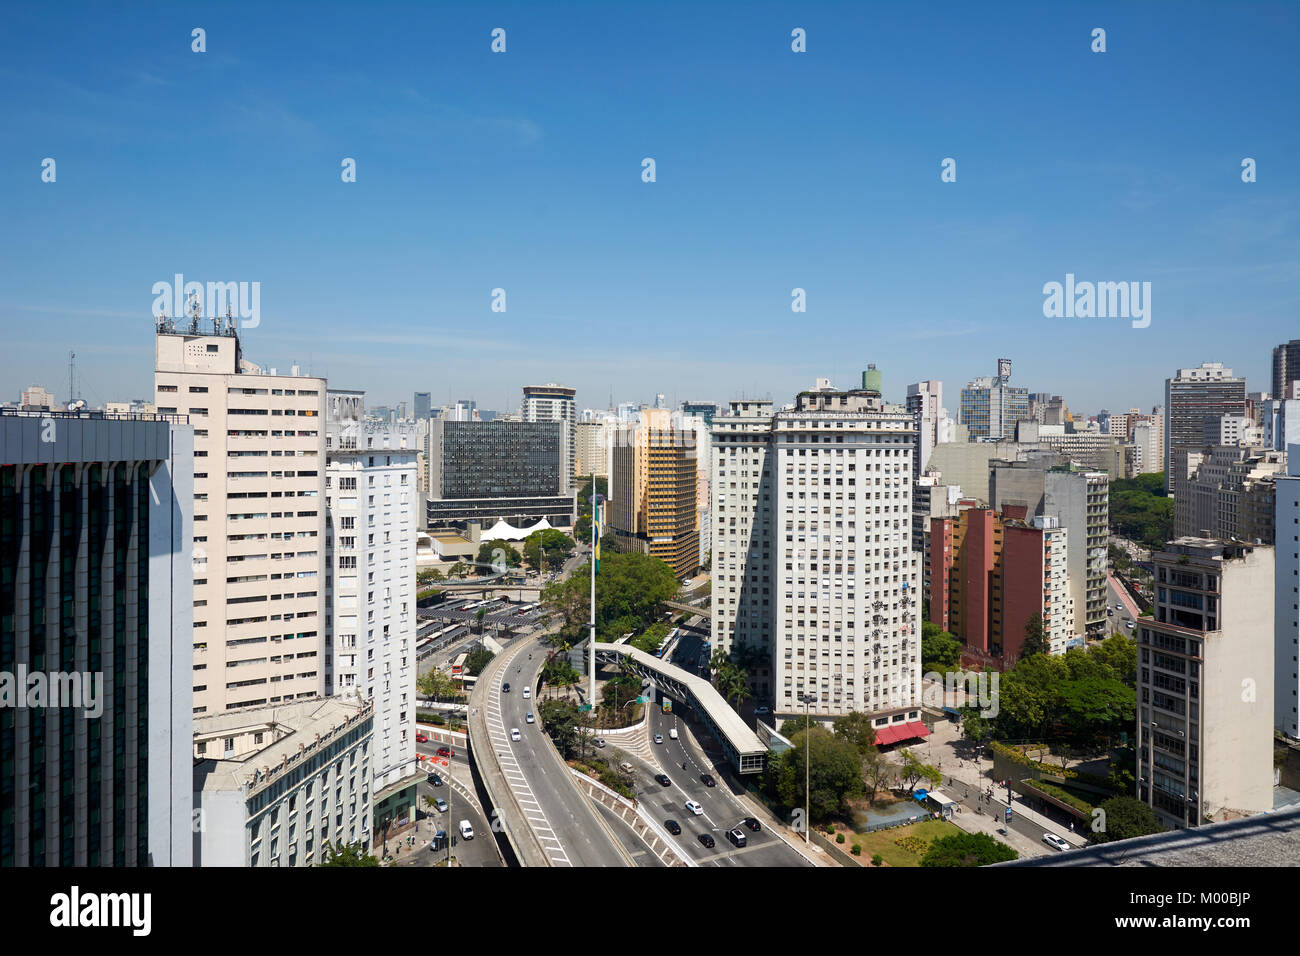 Aerial view of Sao Paulo city, offices buildings, residential buildings and Sao Paulo municipal council chamber, in downtown, Brazil. Stock Photo